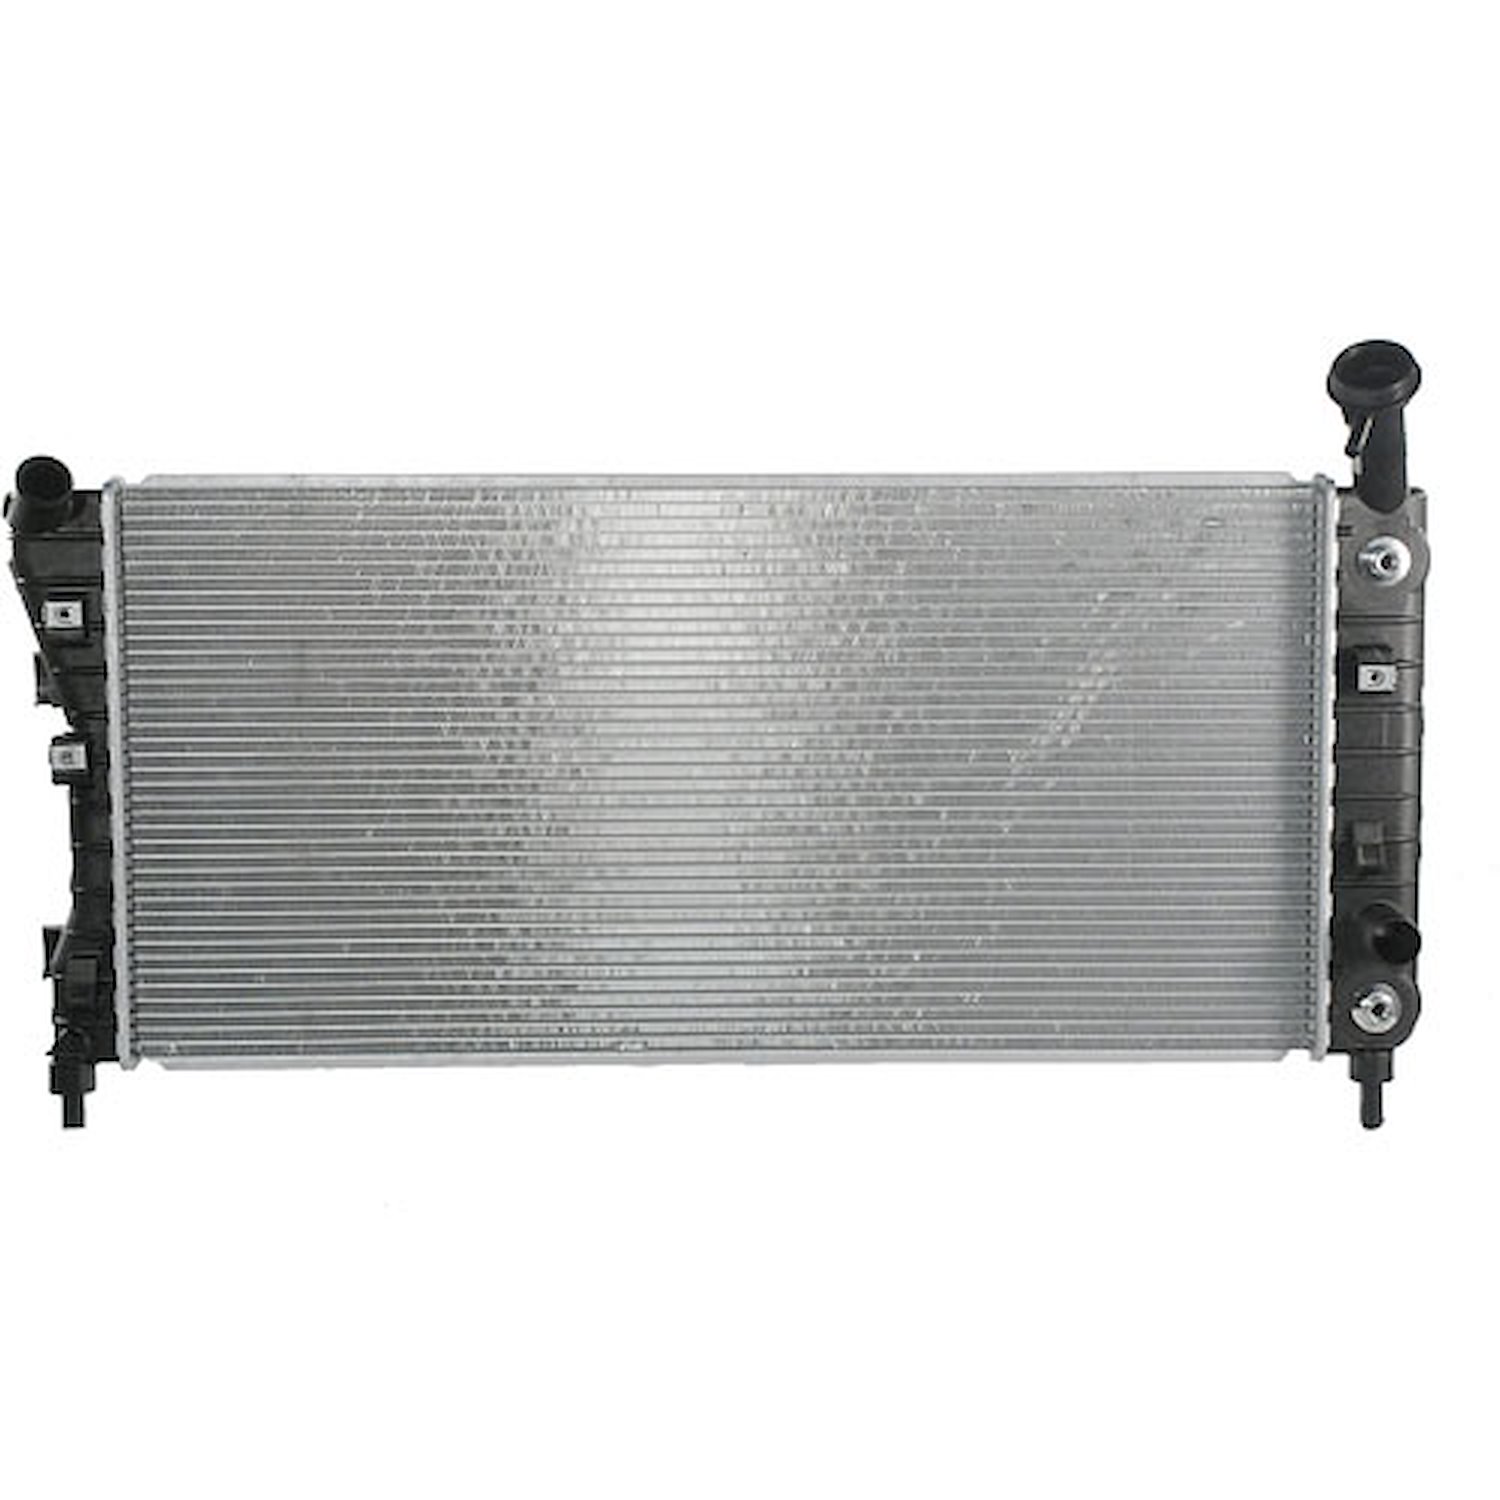 Radiator Assembly for 2004-2009 Buick/Chevy/Pontiac